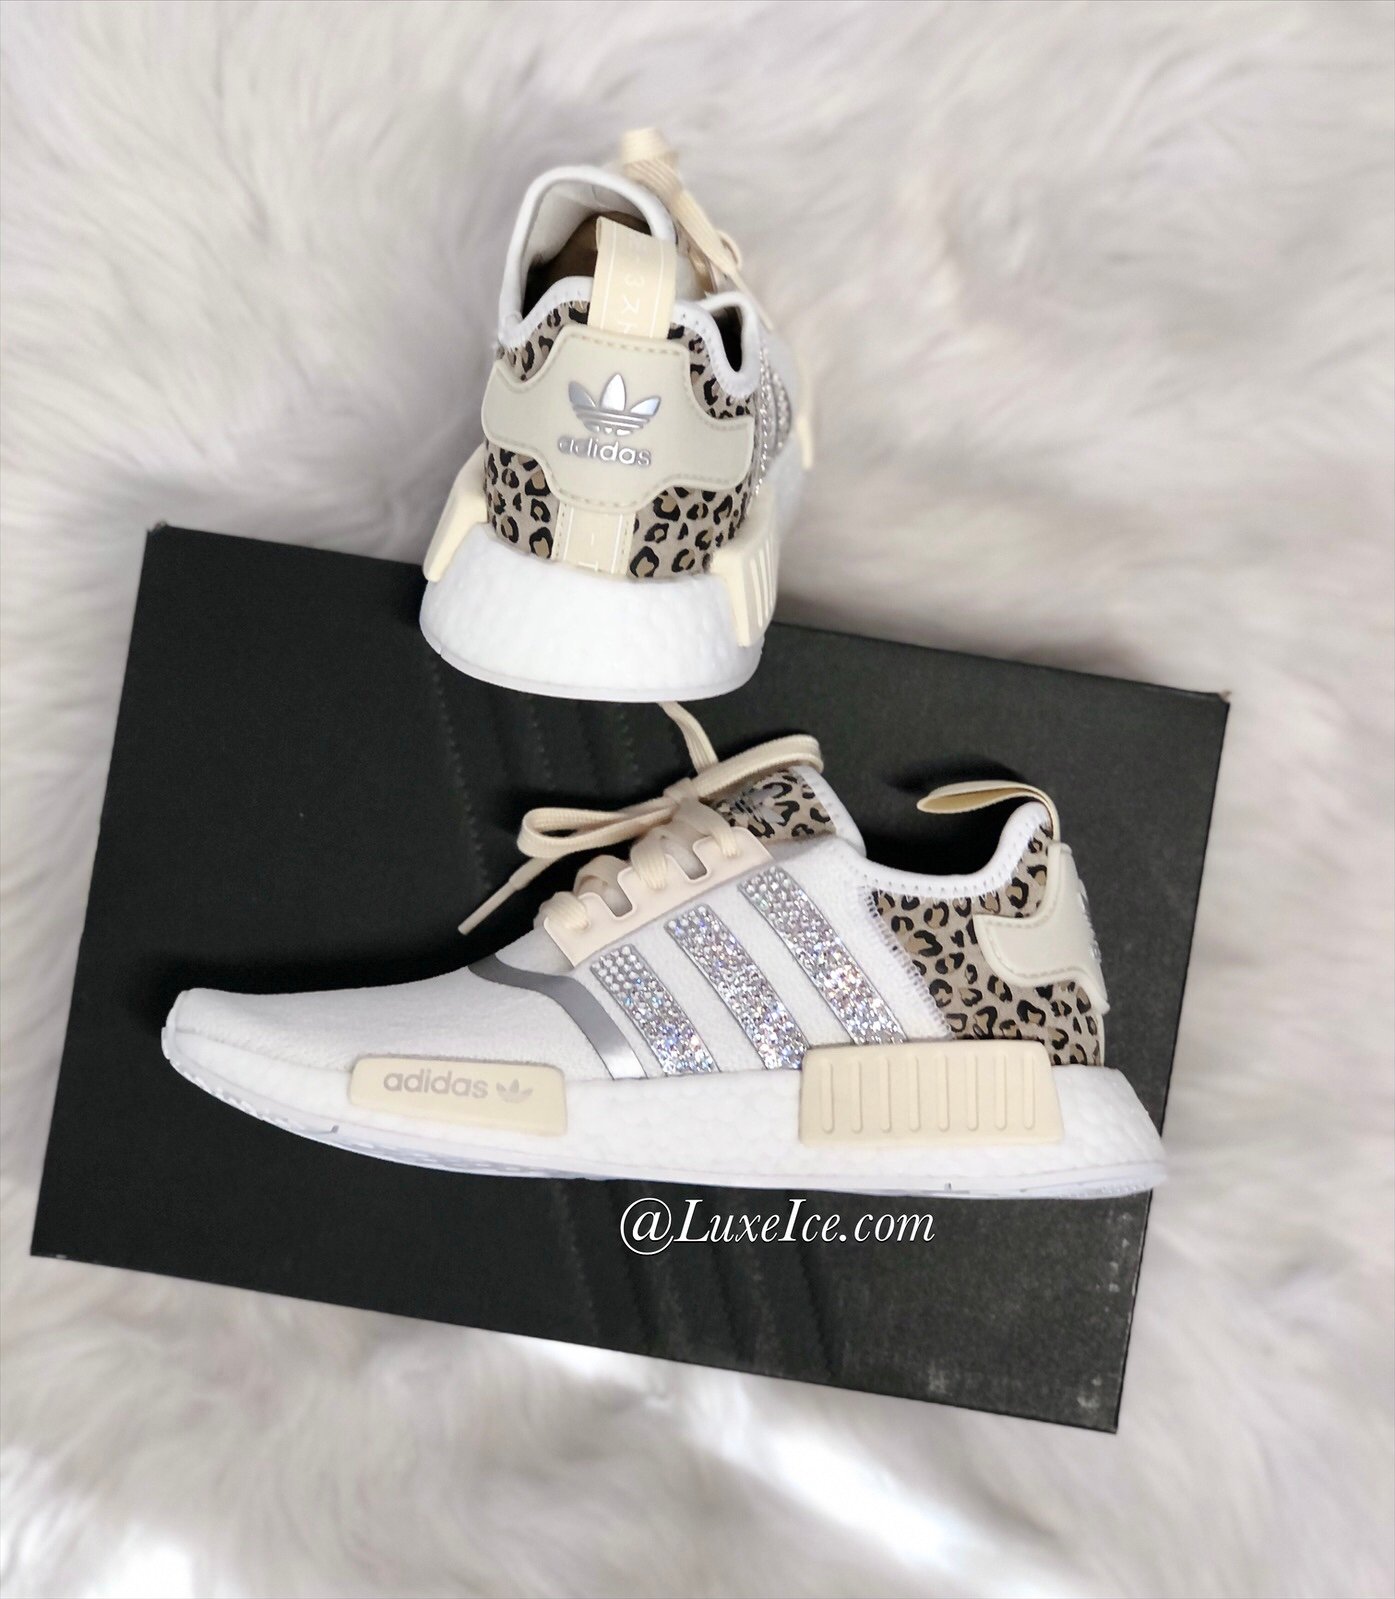 Adidas Nmd R1 Womens Running Casual Shoes Animal Cheetah Print Customized With Swarovski Crystals Luxe Ice